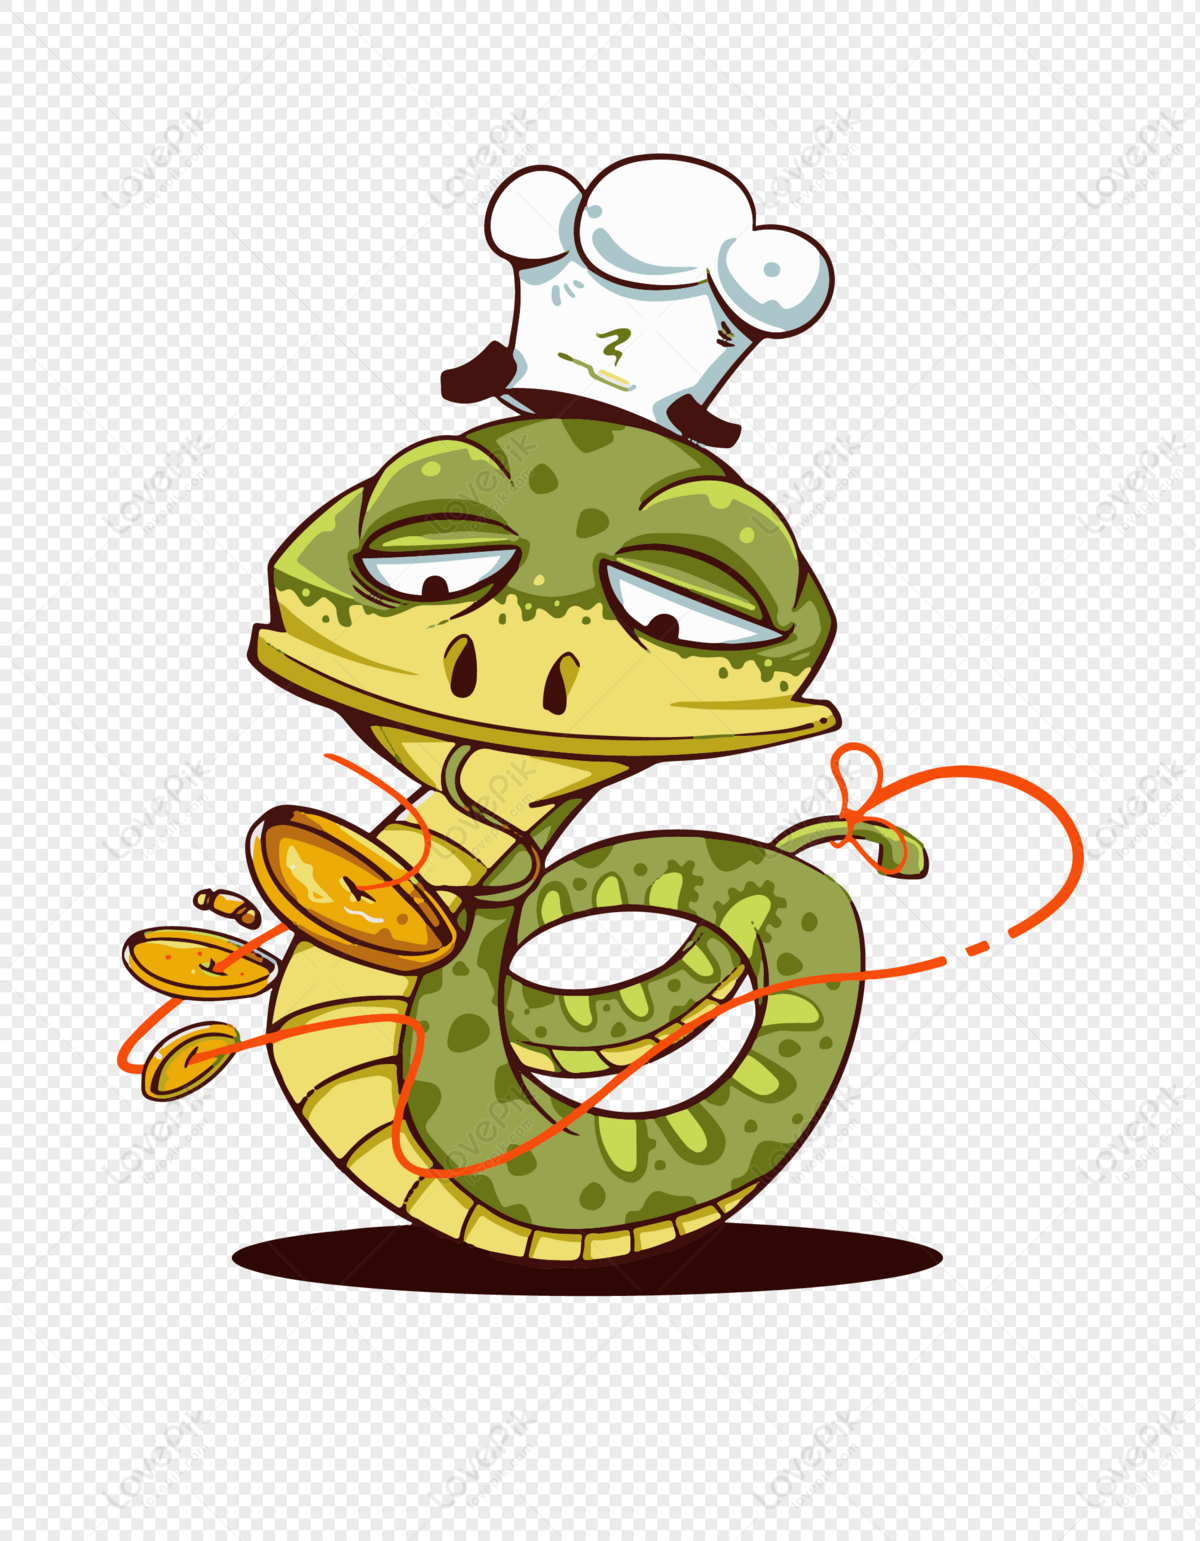 Cartoon Snake Chef Image PNG Transparent Background And Clipart Image For  Free Download - Lovepik | 400841600